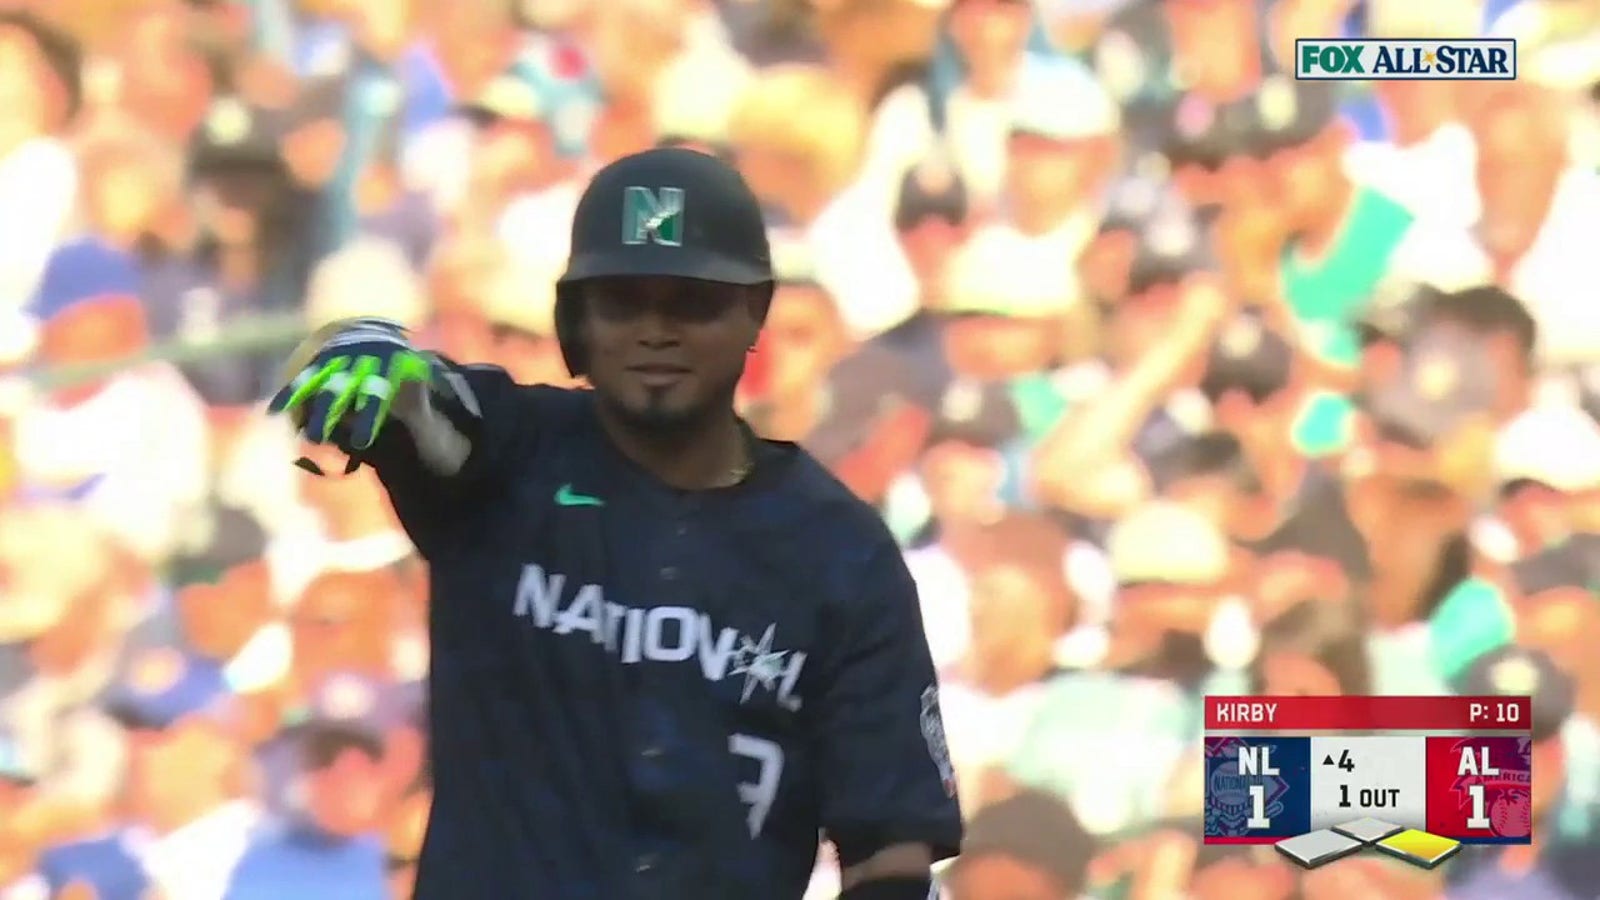 Marlins' Luis Arráez hits an RBI knockdown to score even in the All-Star Game